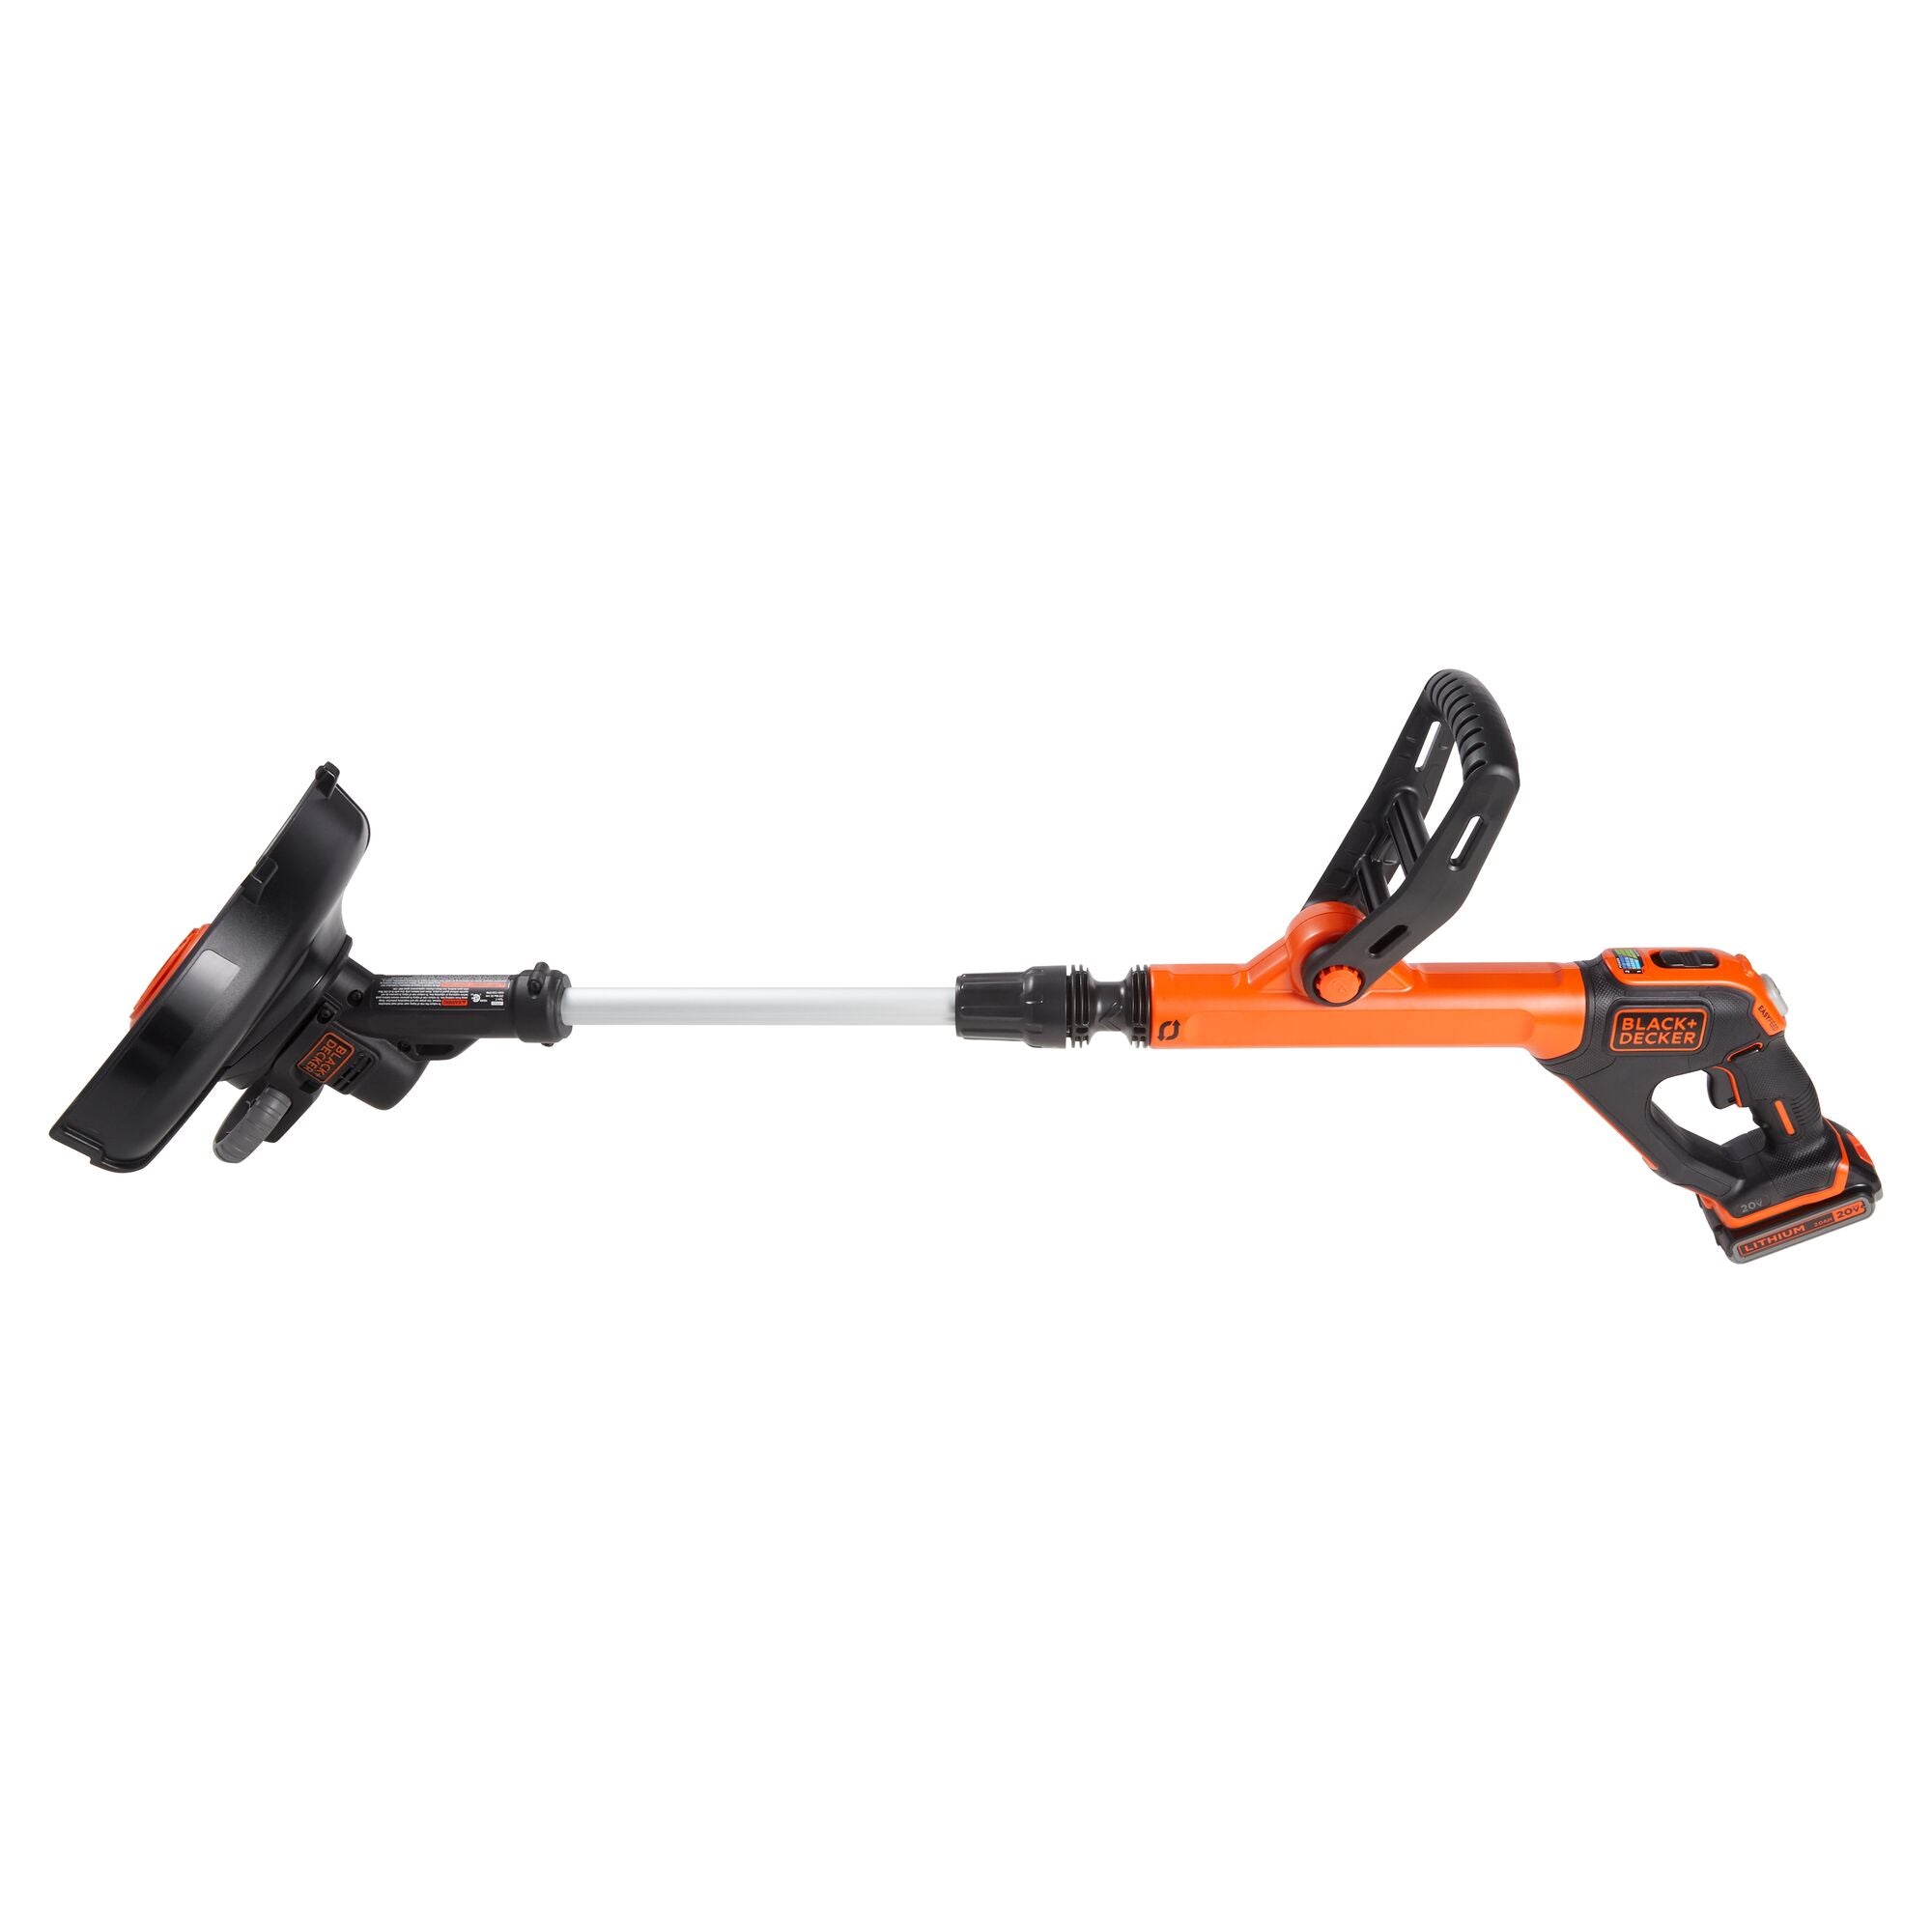 A close view of the BLACK+DECKER 20V MAX* String Trimmer lower part in black and orange color.